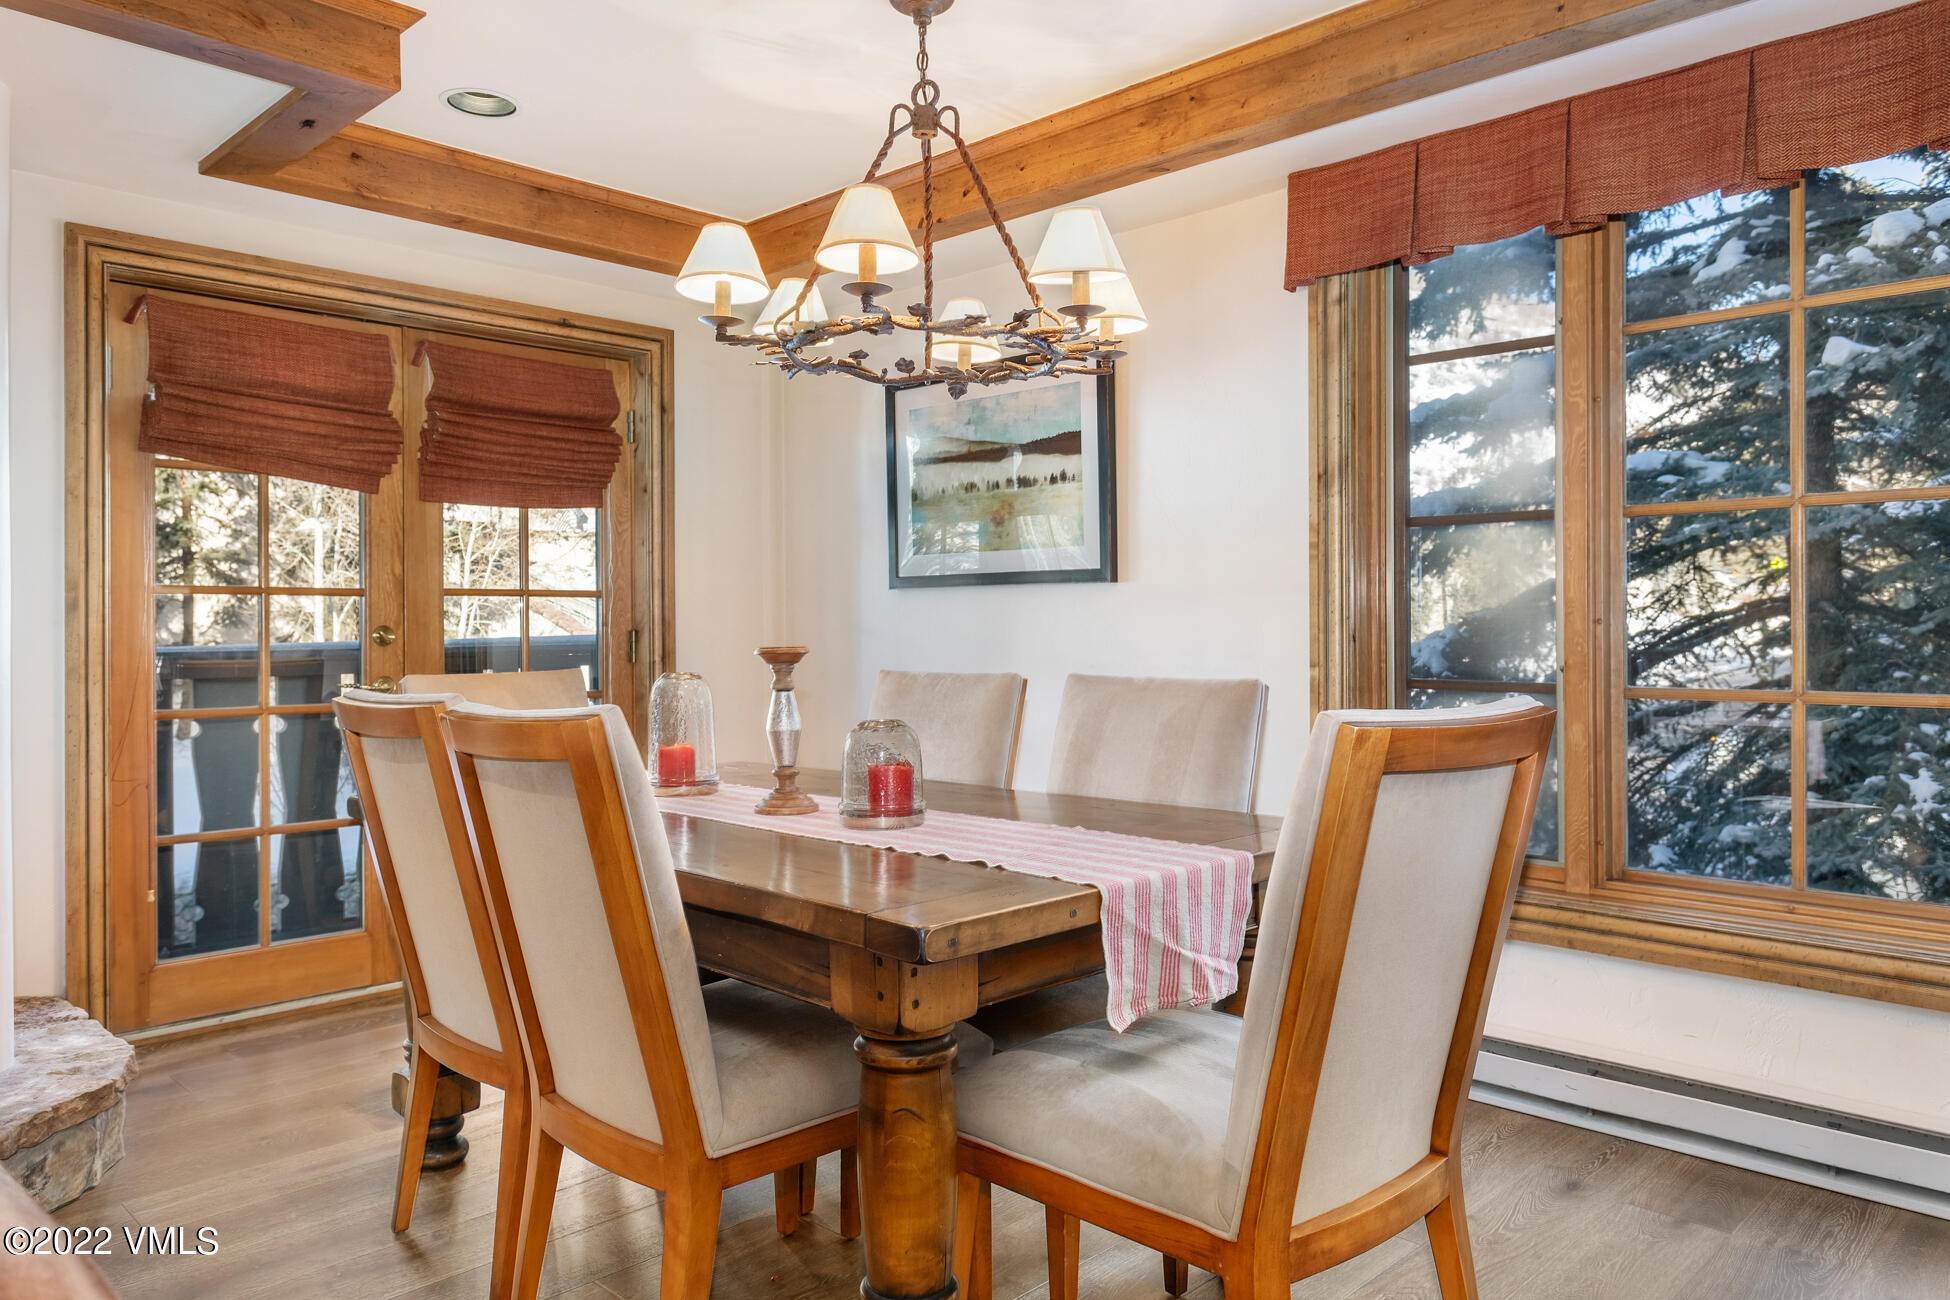 11. fractional ownership prop for Active at 352 Meadow Vail, Colorado 81657 United States